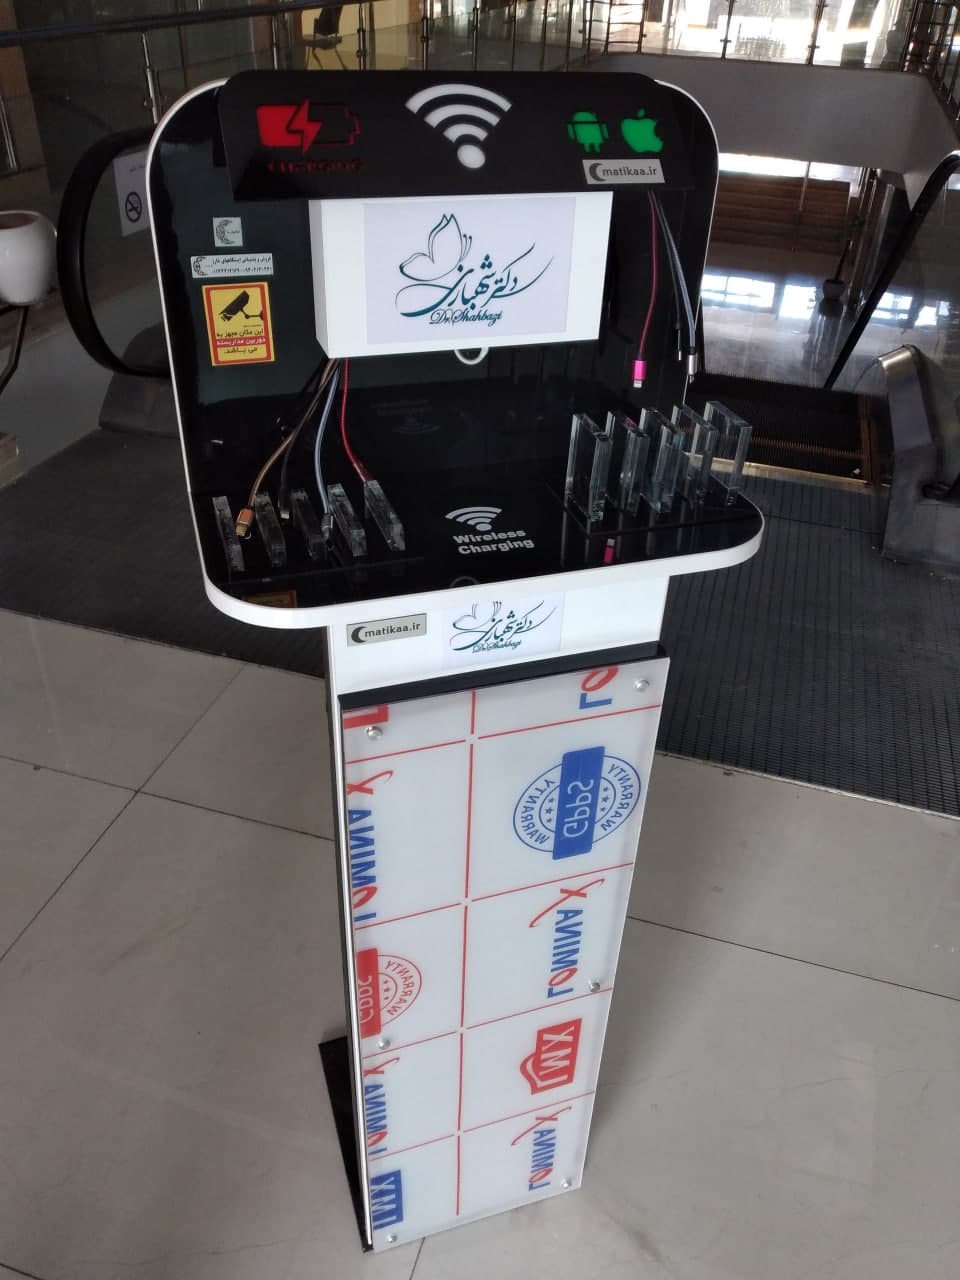 Charging - Public Places - Charger Fast Chargers - Desktop Chargers - Mobile Stands - Mobile Public Stands - General Chargers - Announcement Panels - Smart Information Panels - Multiple Chargers - Information Panels